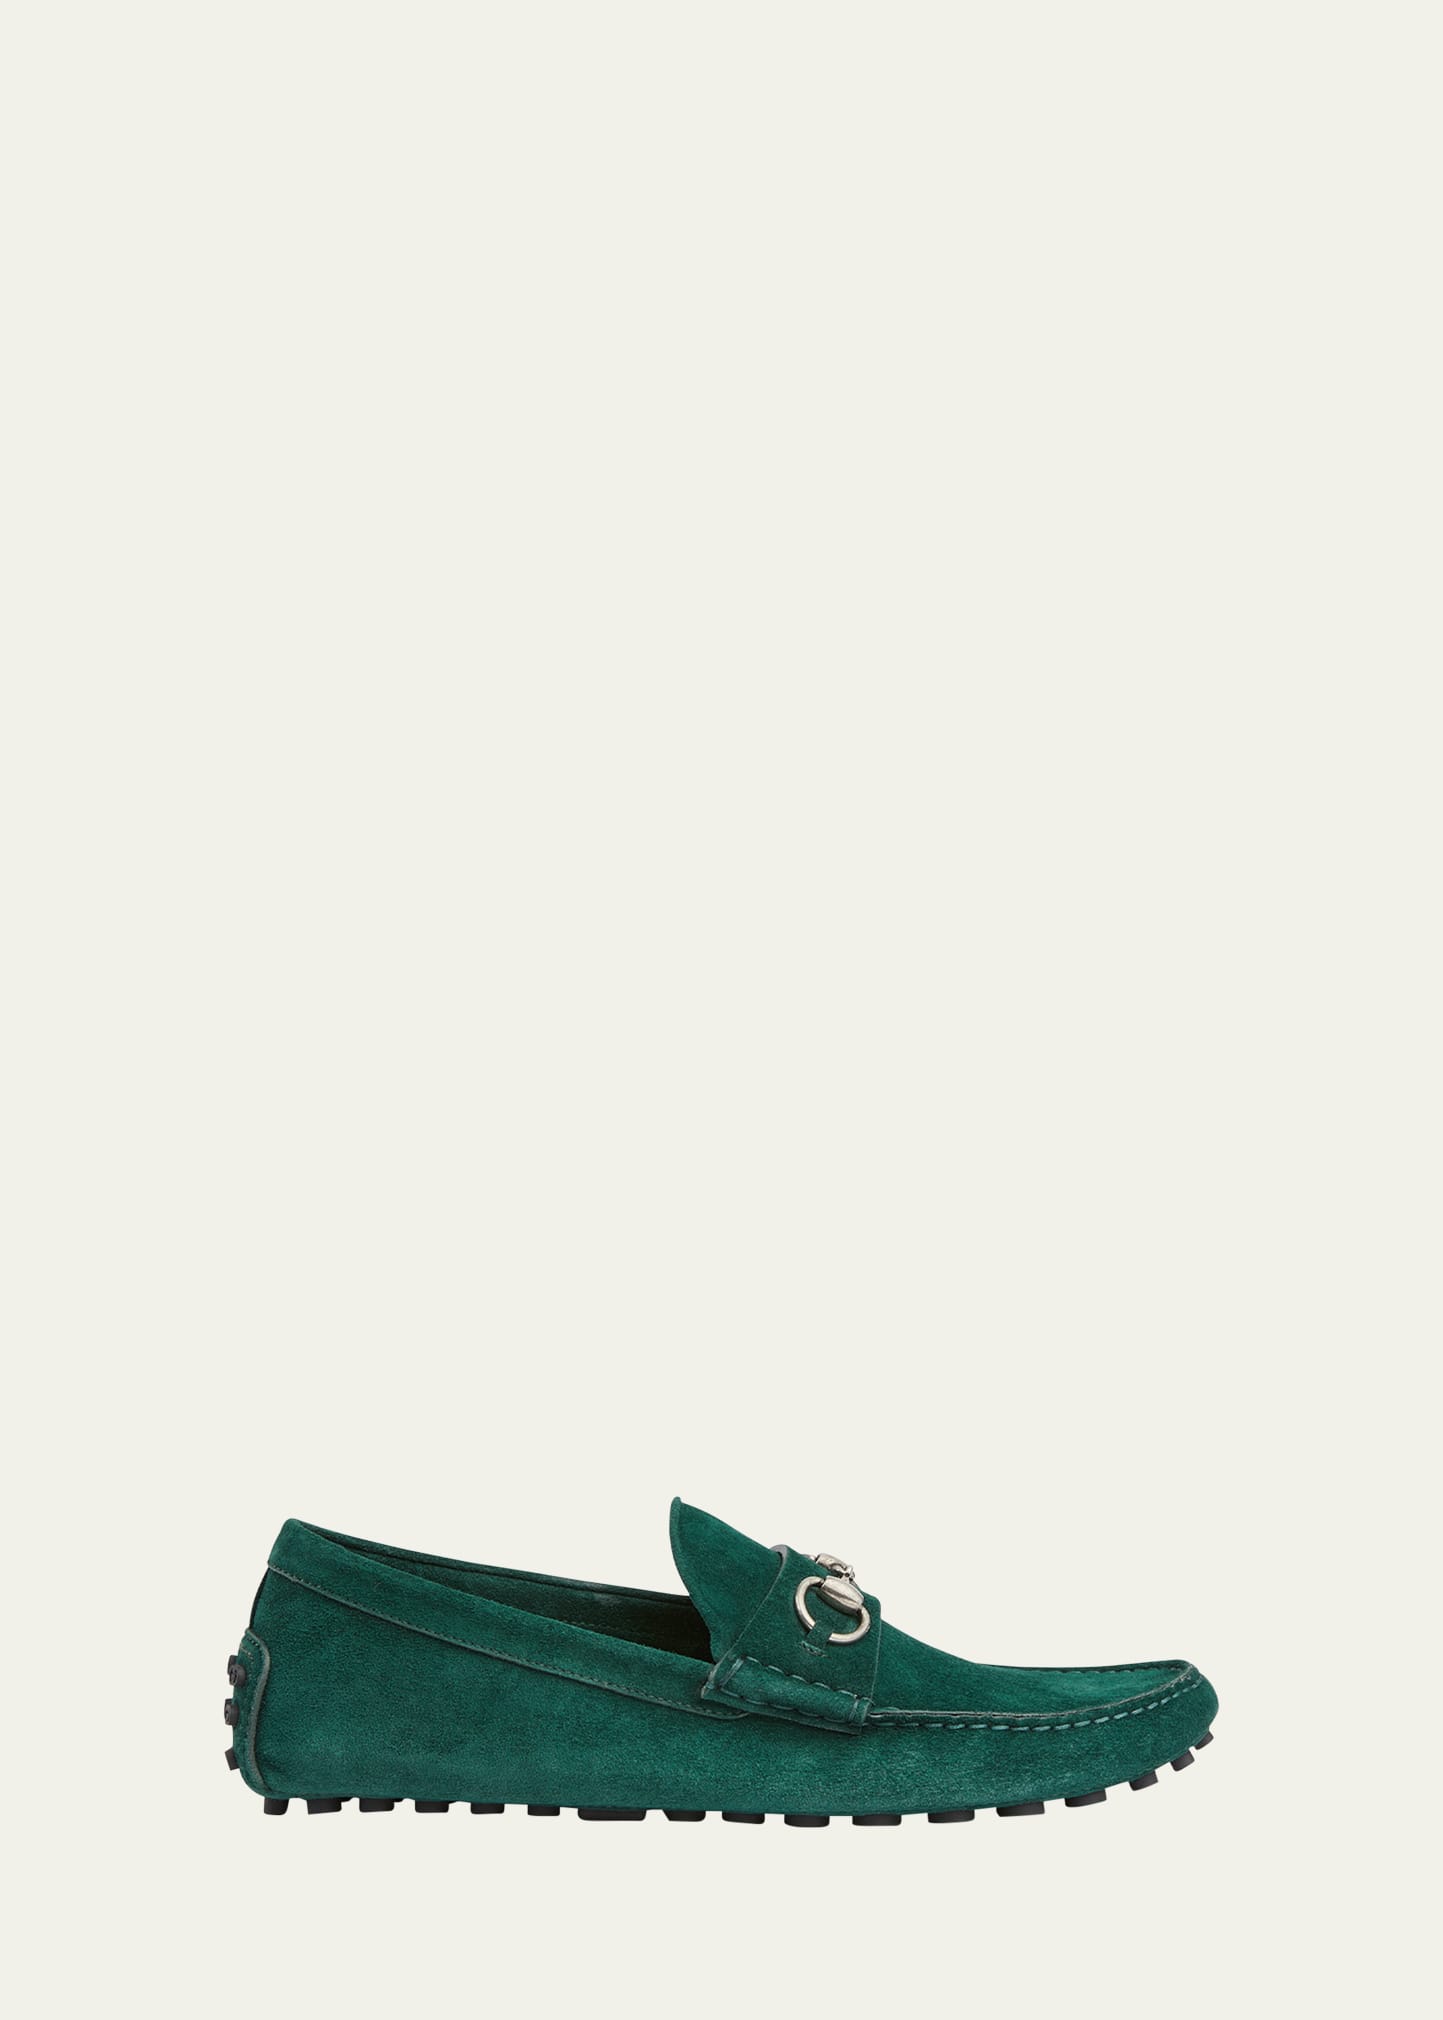 Gucci Horsebit Suede Driving Shoes In Green